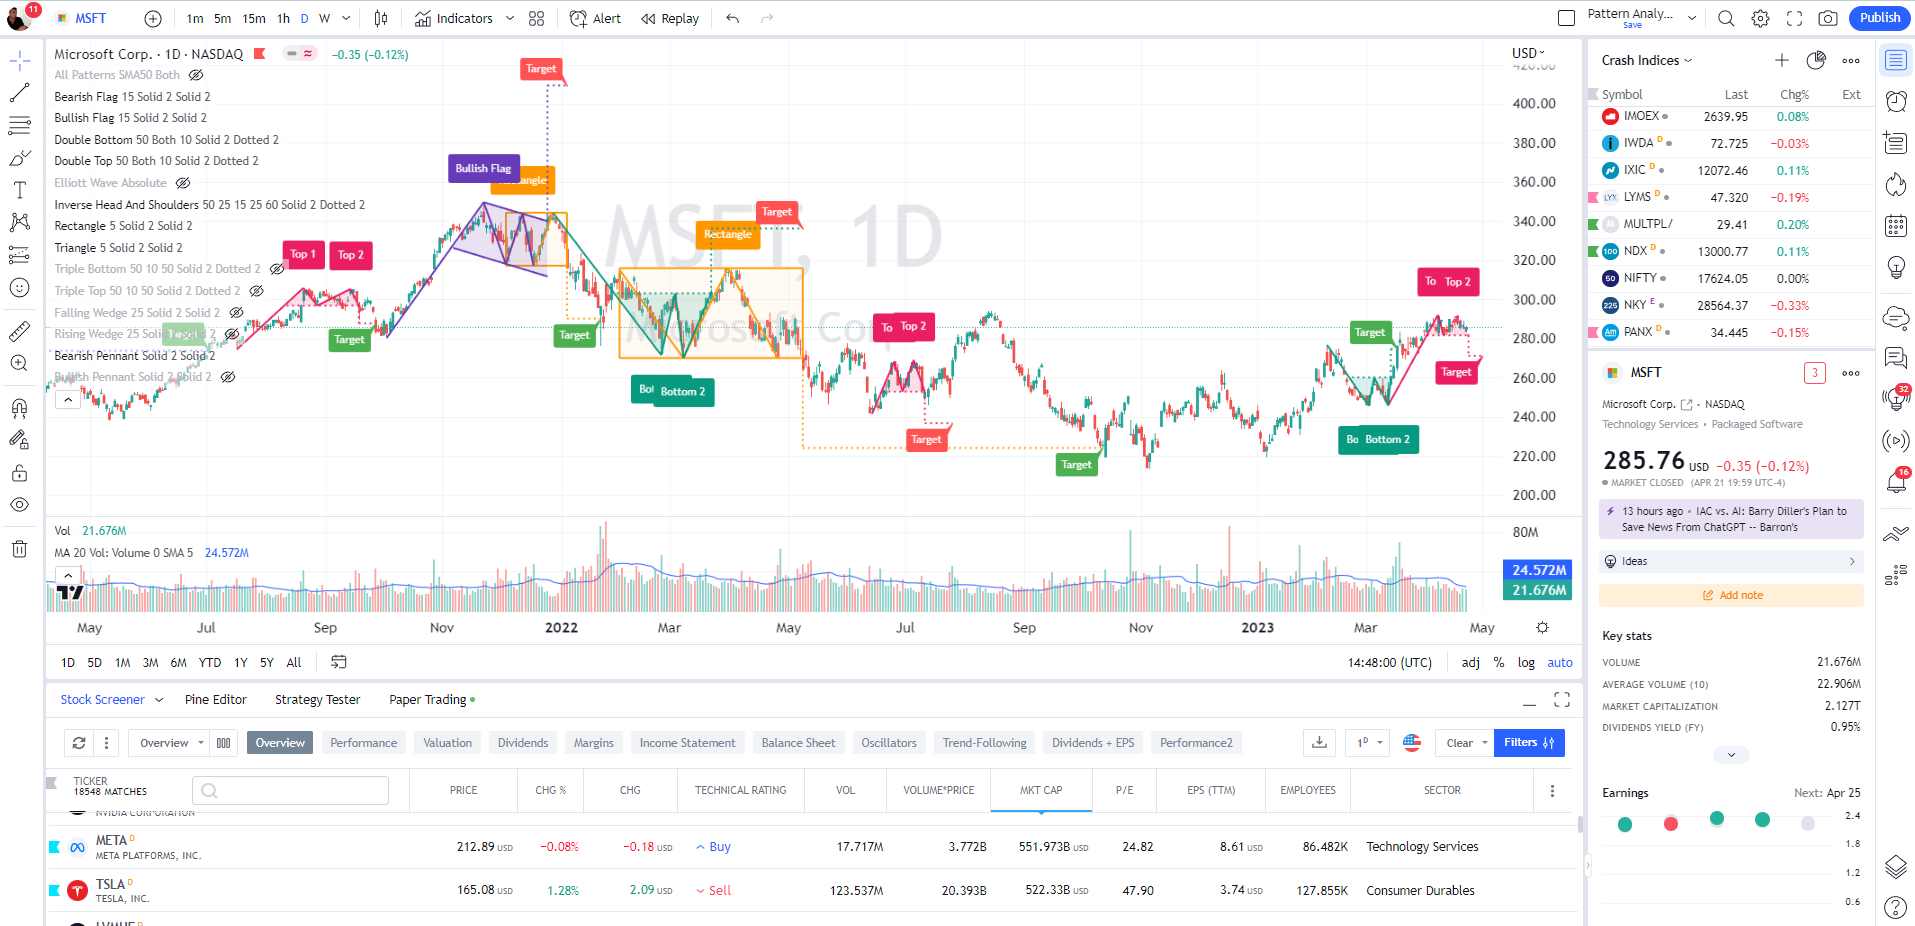 PREMIUM: Check any stock chart for Technical Events to get instant insight